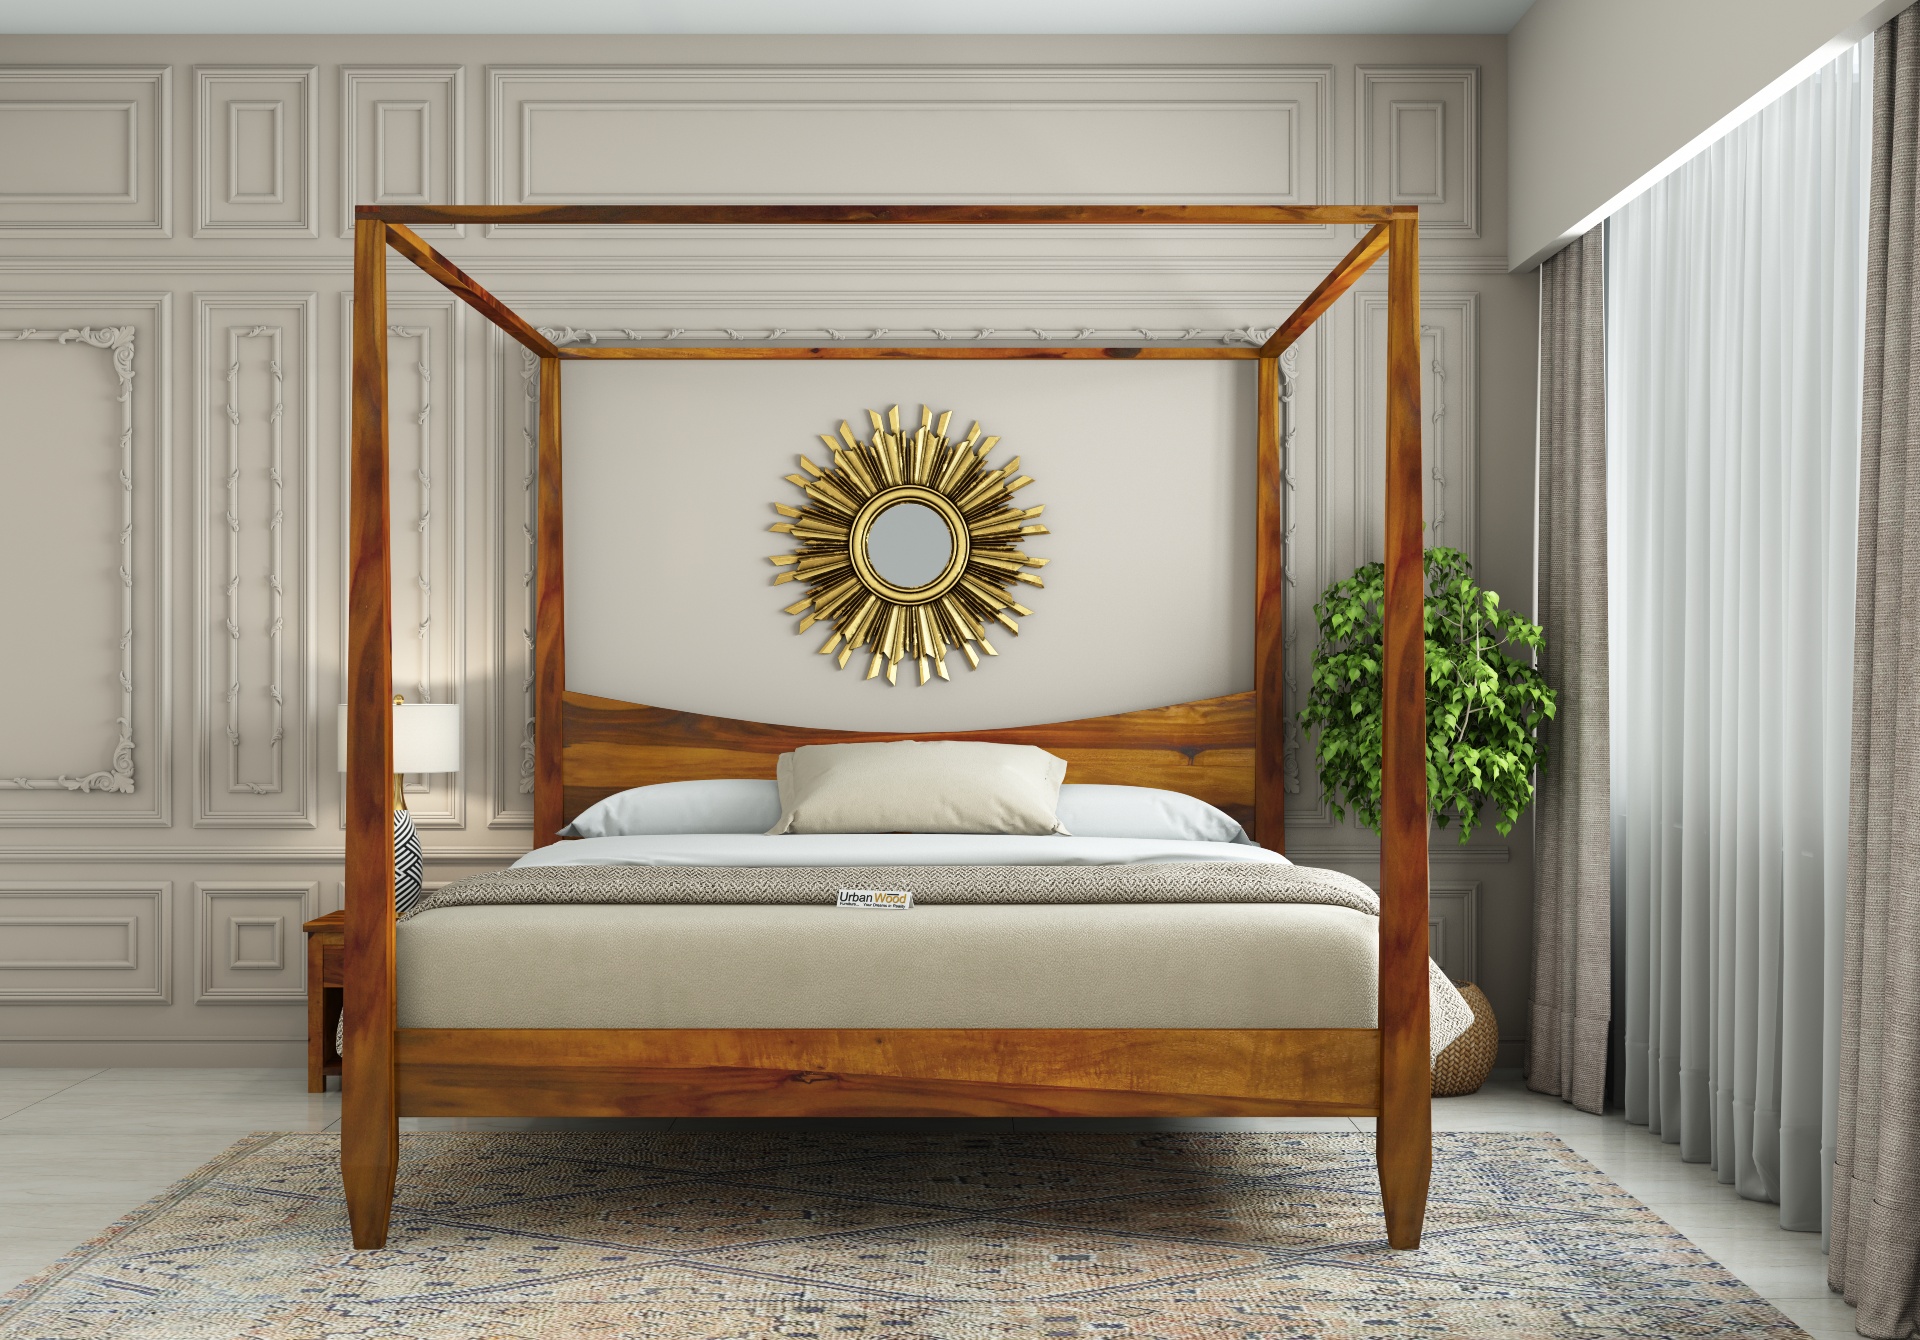 Flora Poster Bed (Queen Size, Honey Finish)